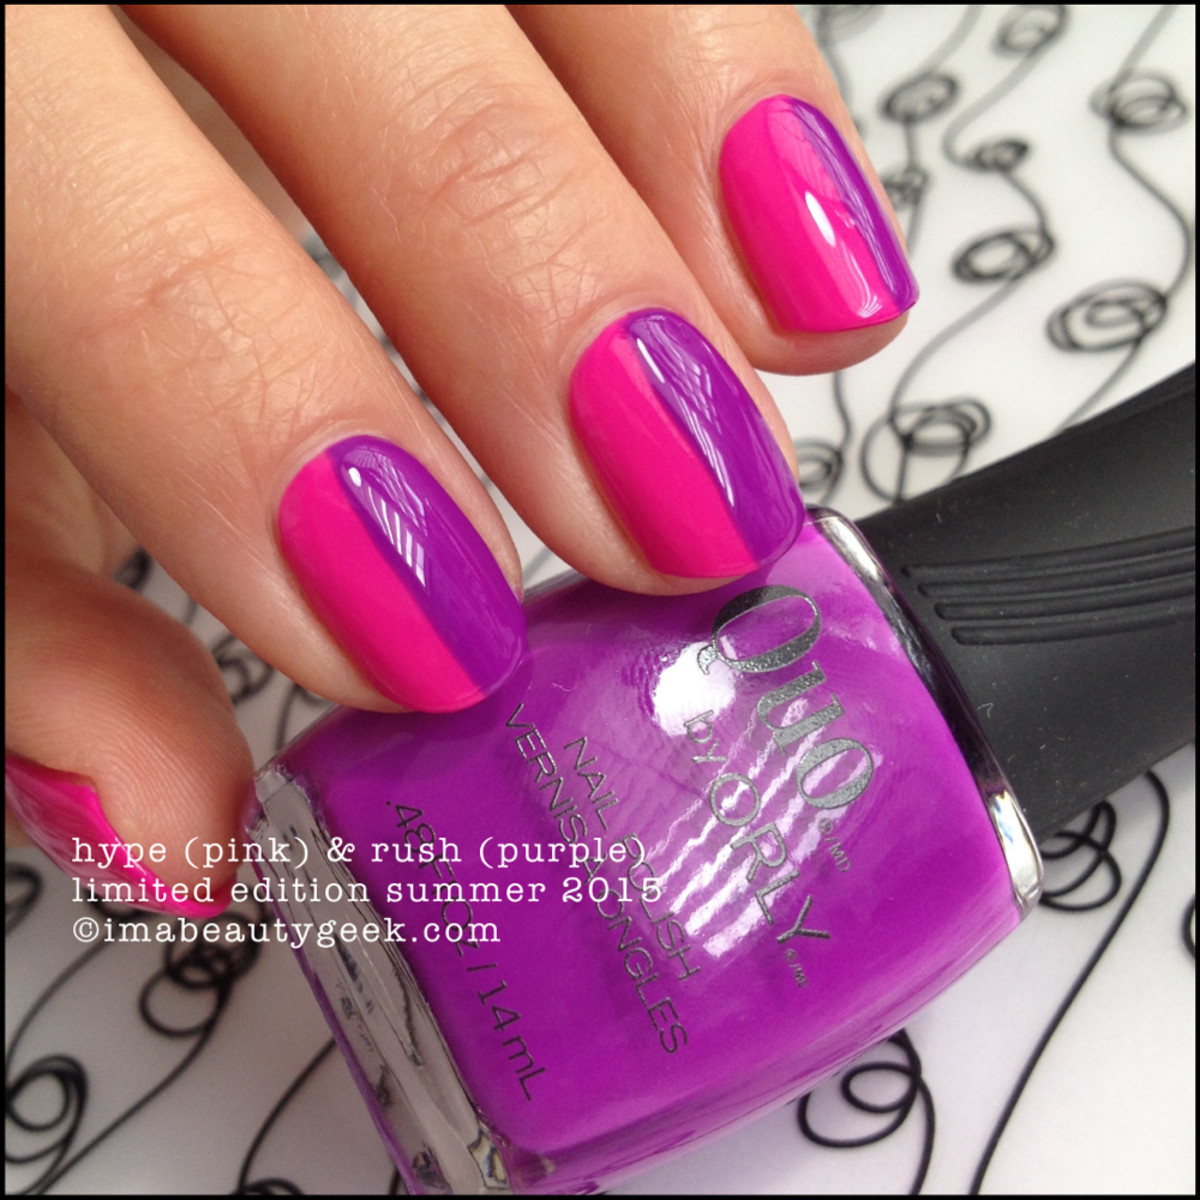 Orly Risky Behavior and Orly Be Daring Neon Mani Summer 2015